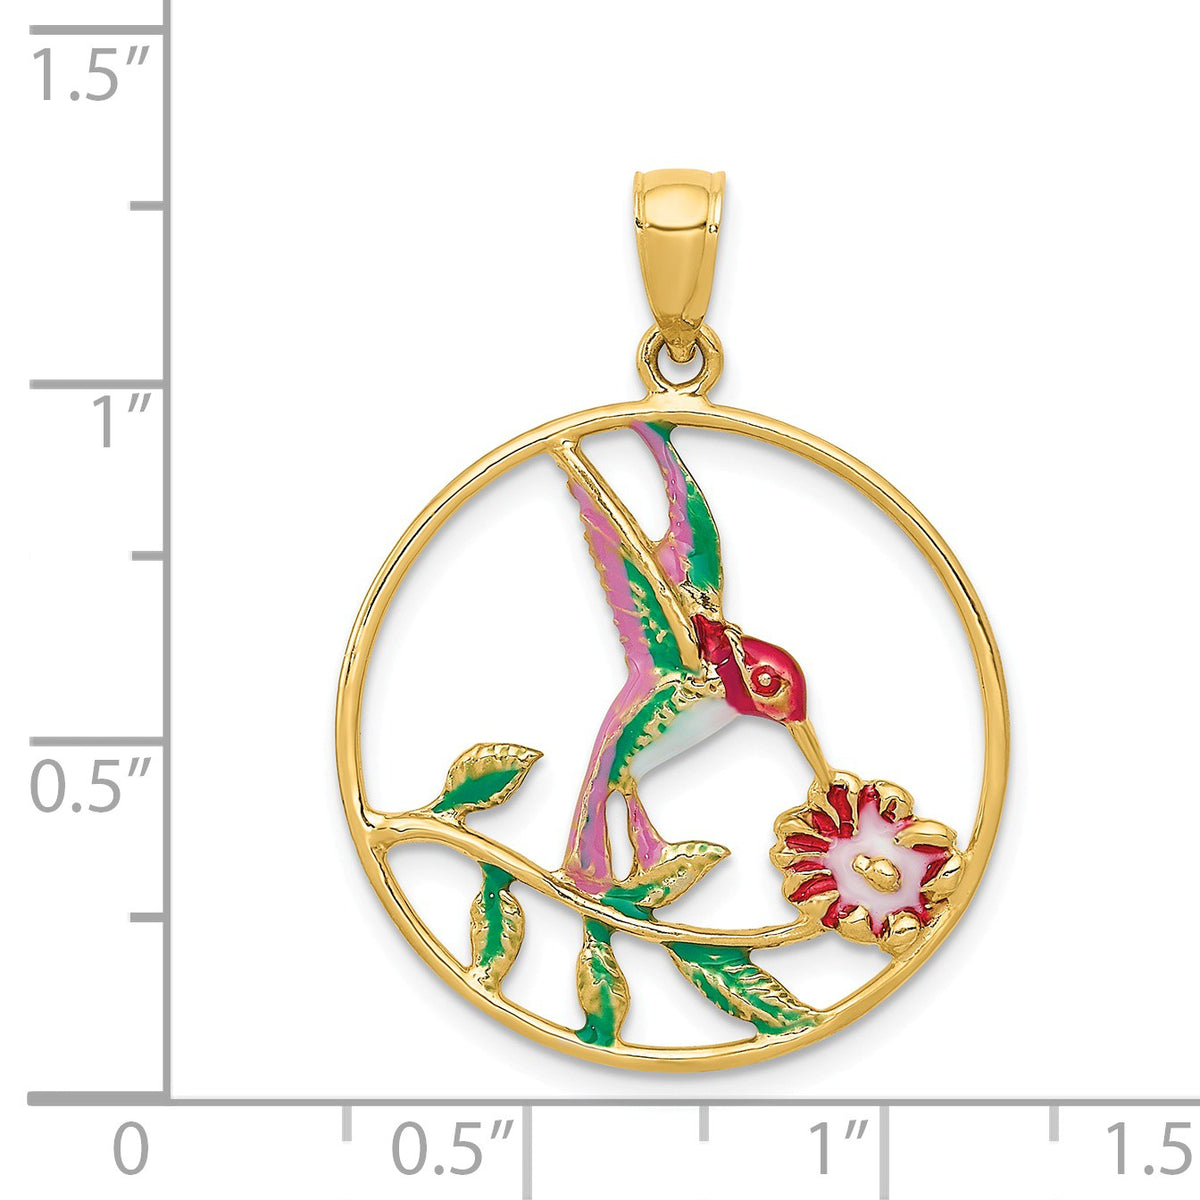 Alternate view of the 14k Yellow Gold &amp; Enamel 24mm Round Hummingbird &amp; Flower Pendant by The Black Bow Jewelry Co.